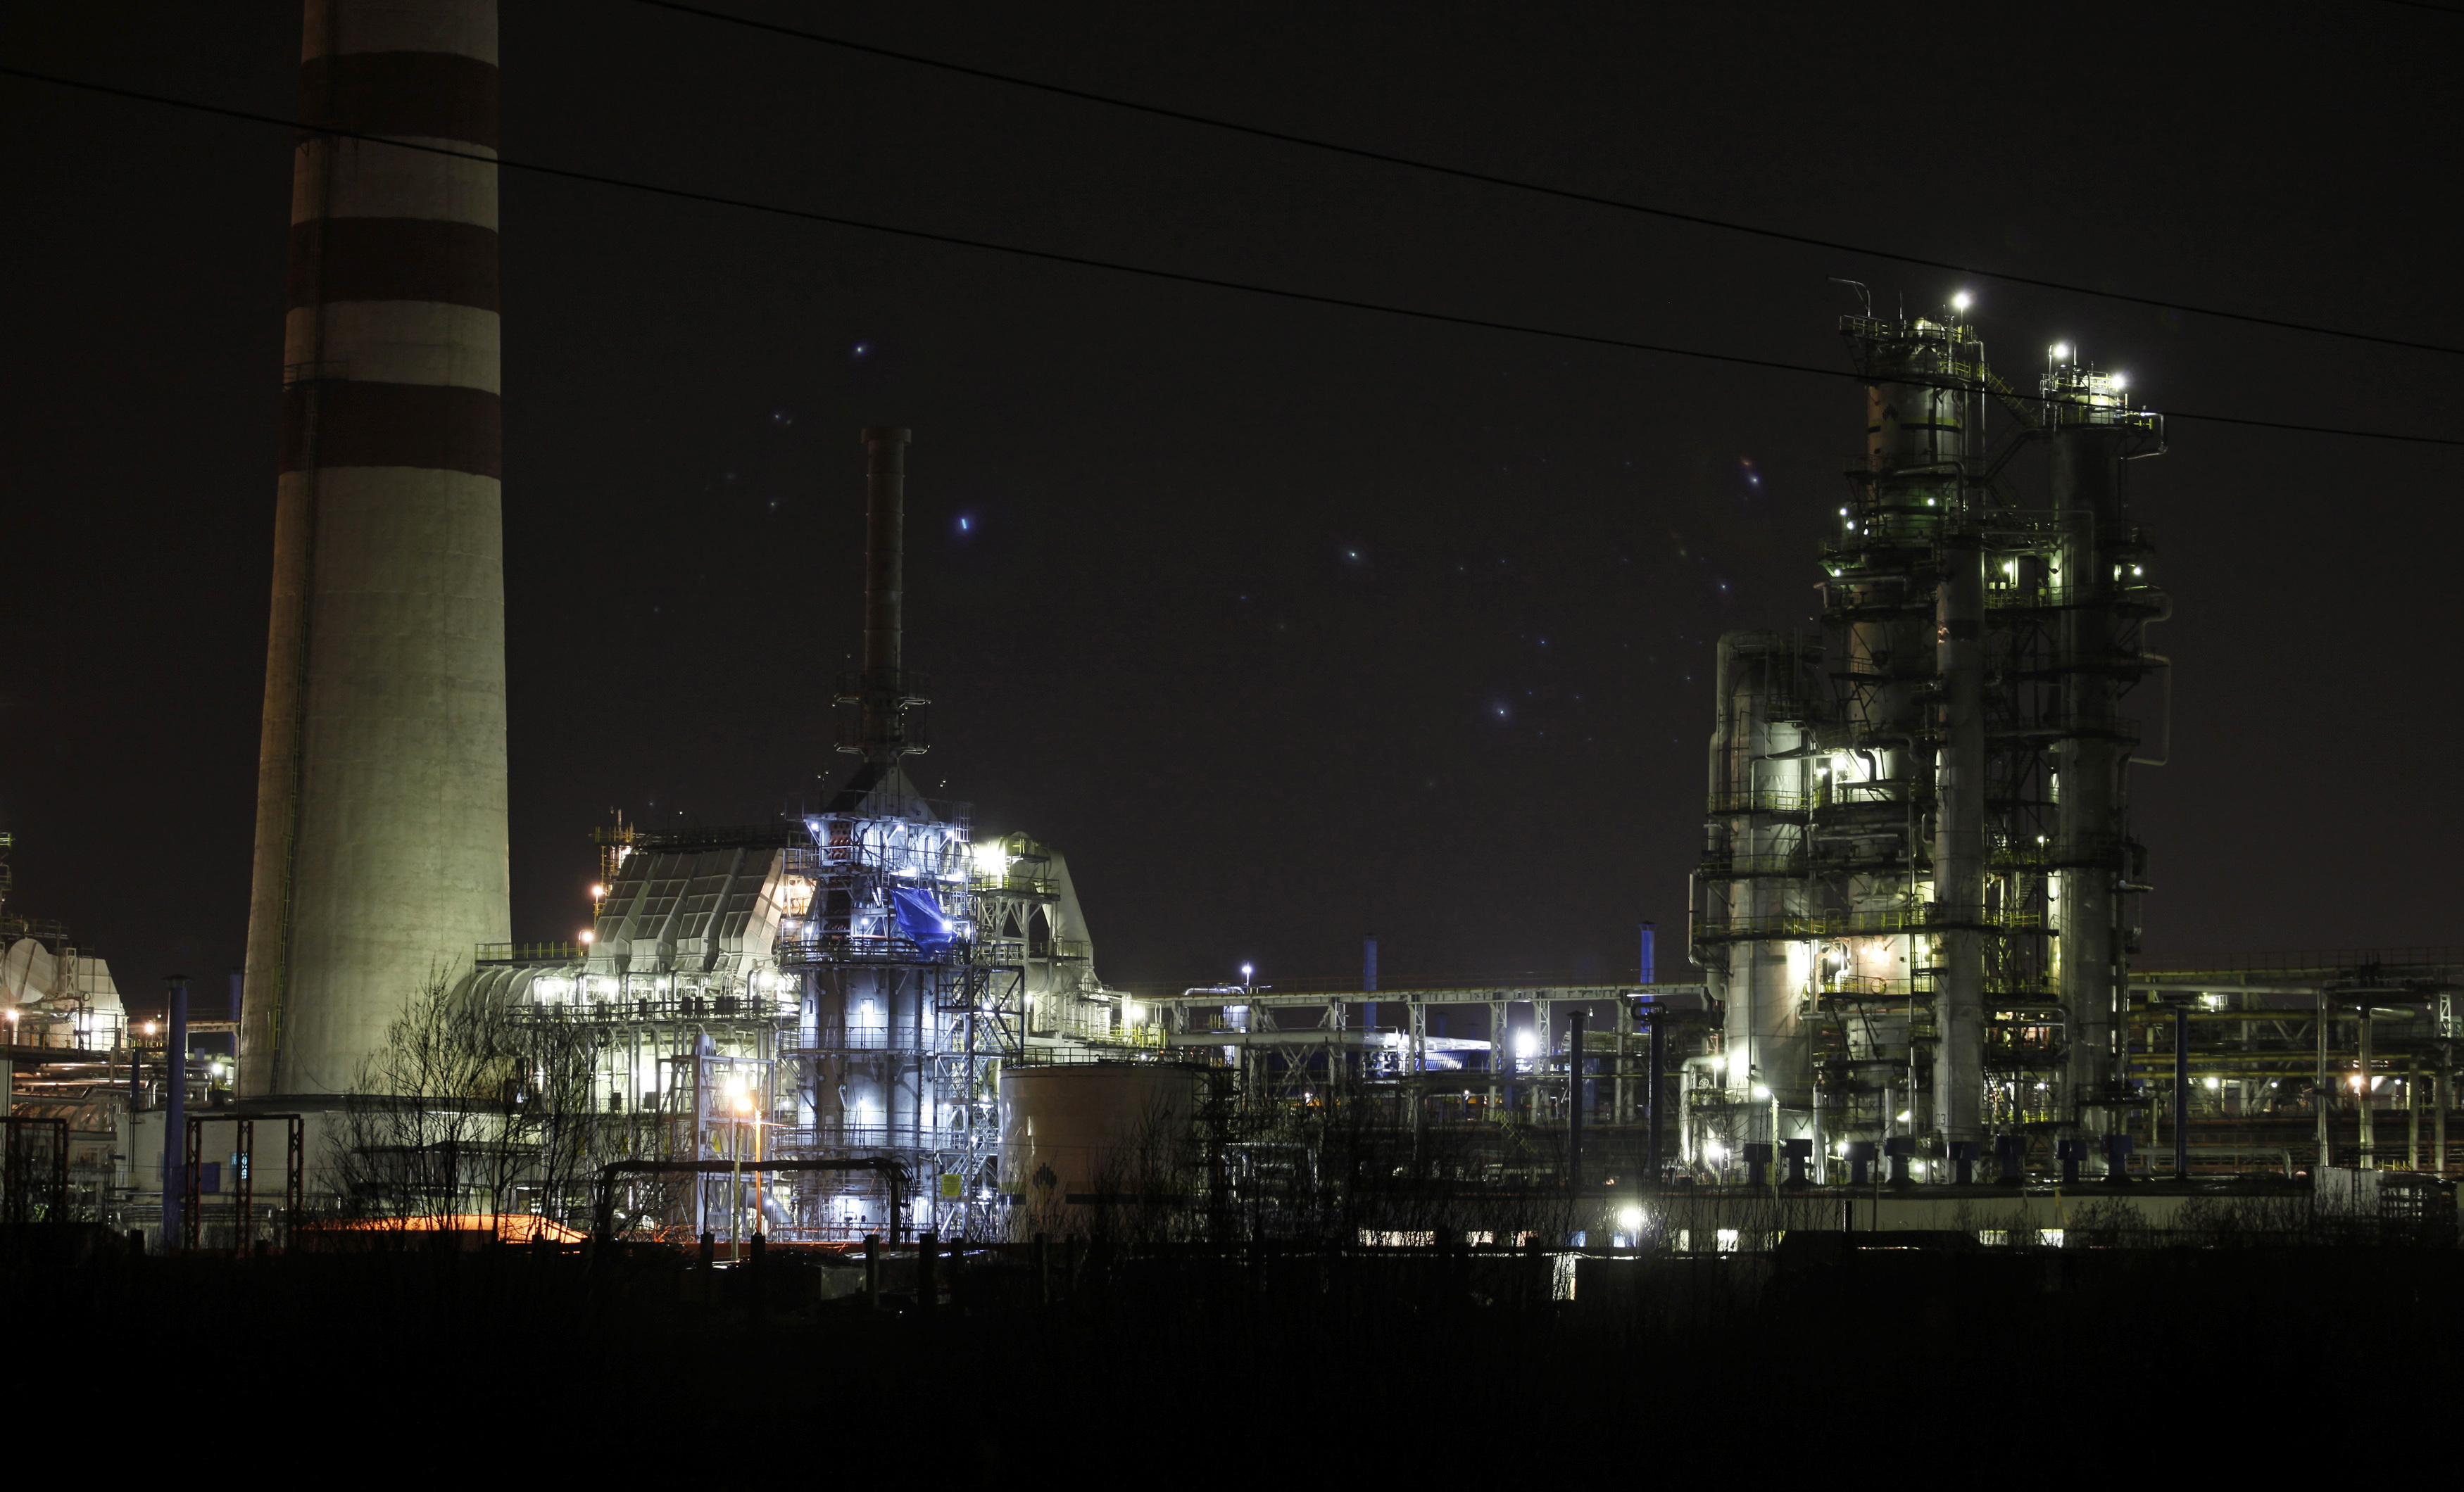 A view of the Rosneft Achinsk oil refinery plant near Achinsk